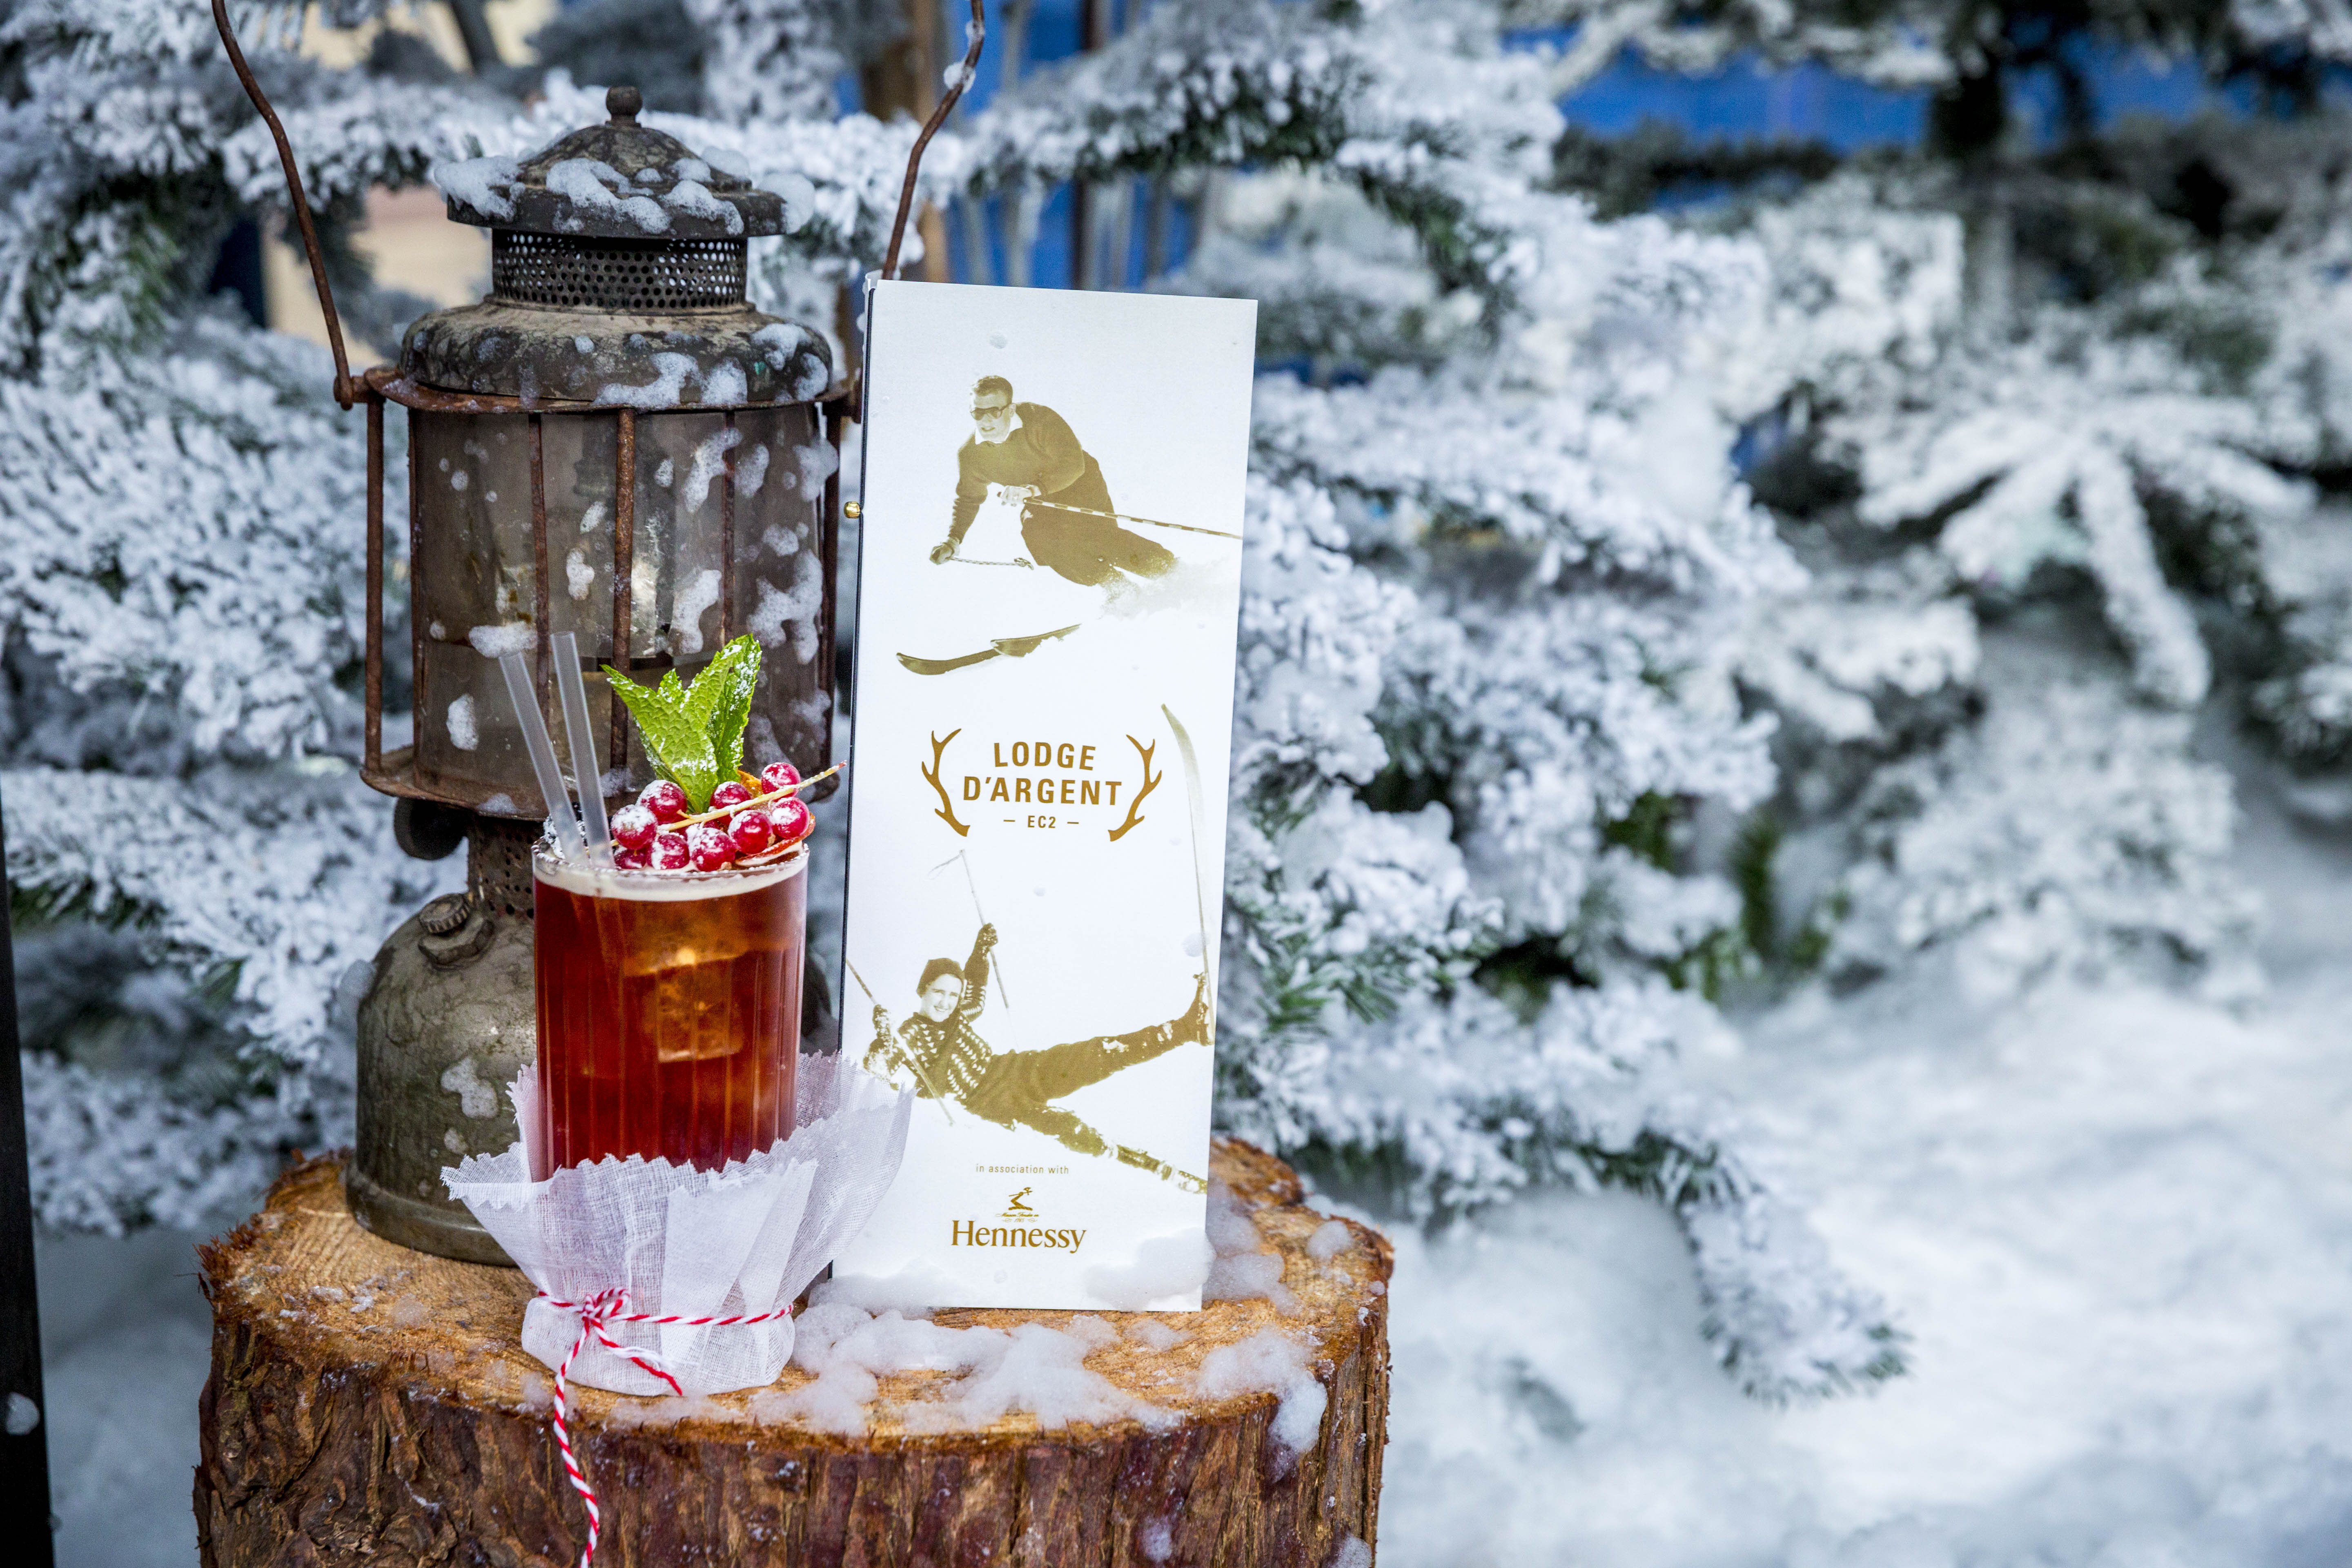 icey cocktail and lodge menu sitting on a tree stump